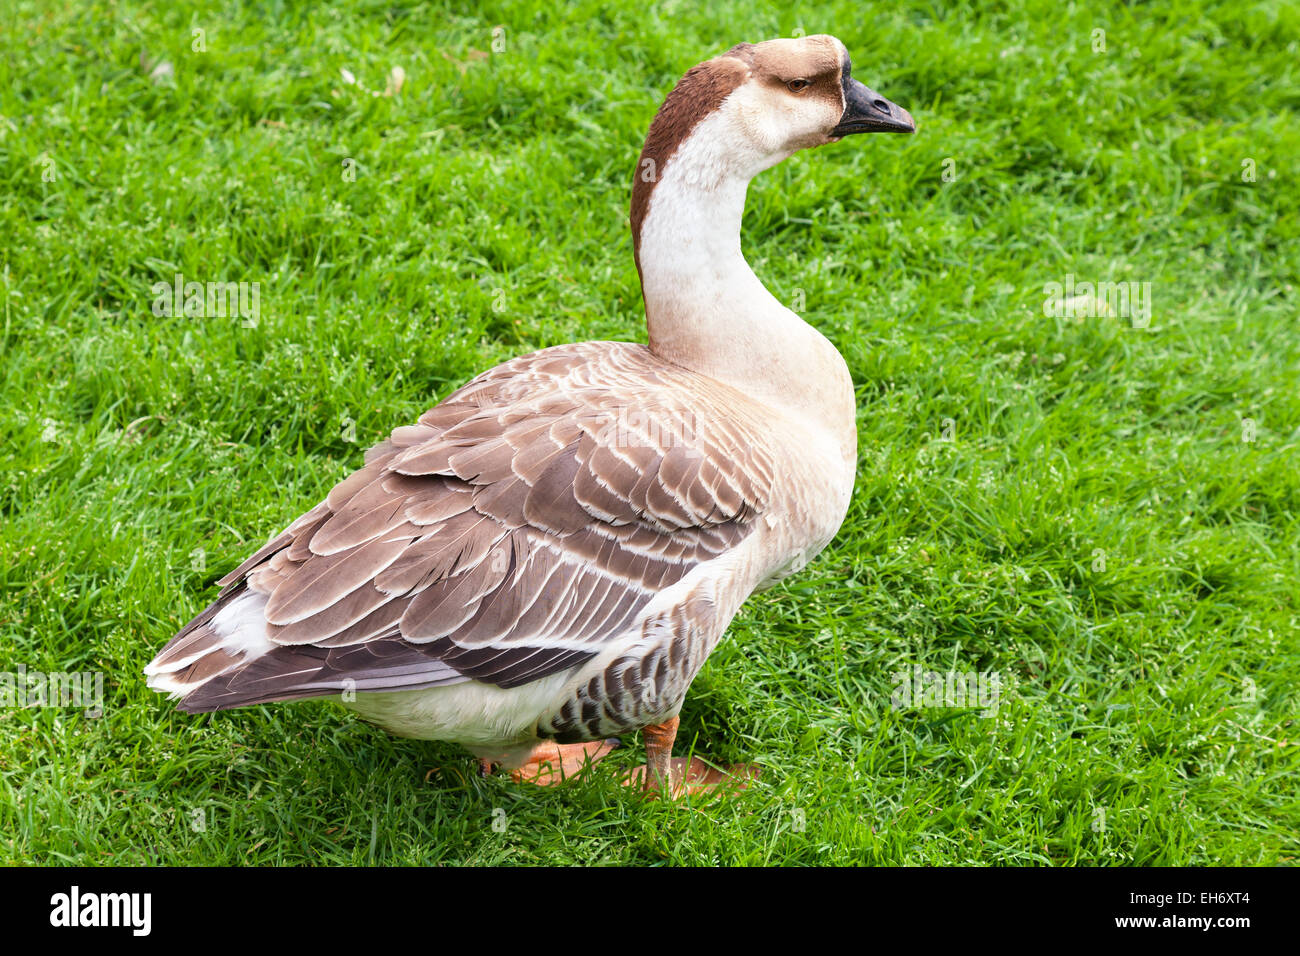 Big gray brown goose stands on green grass Stock Photo